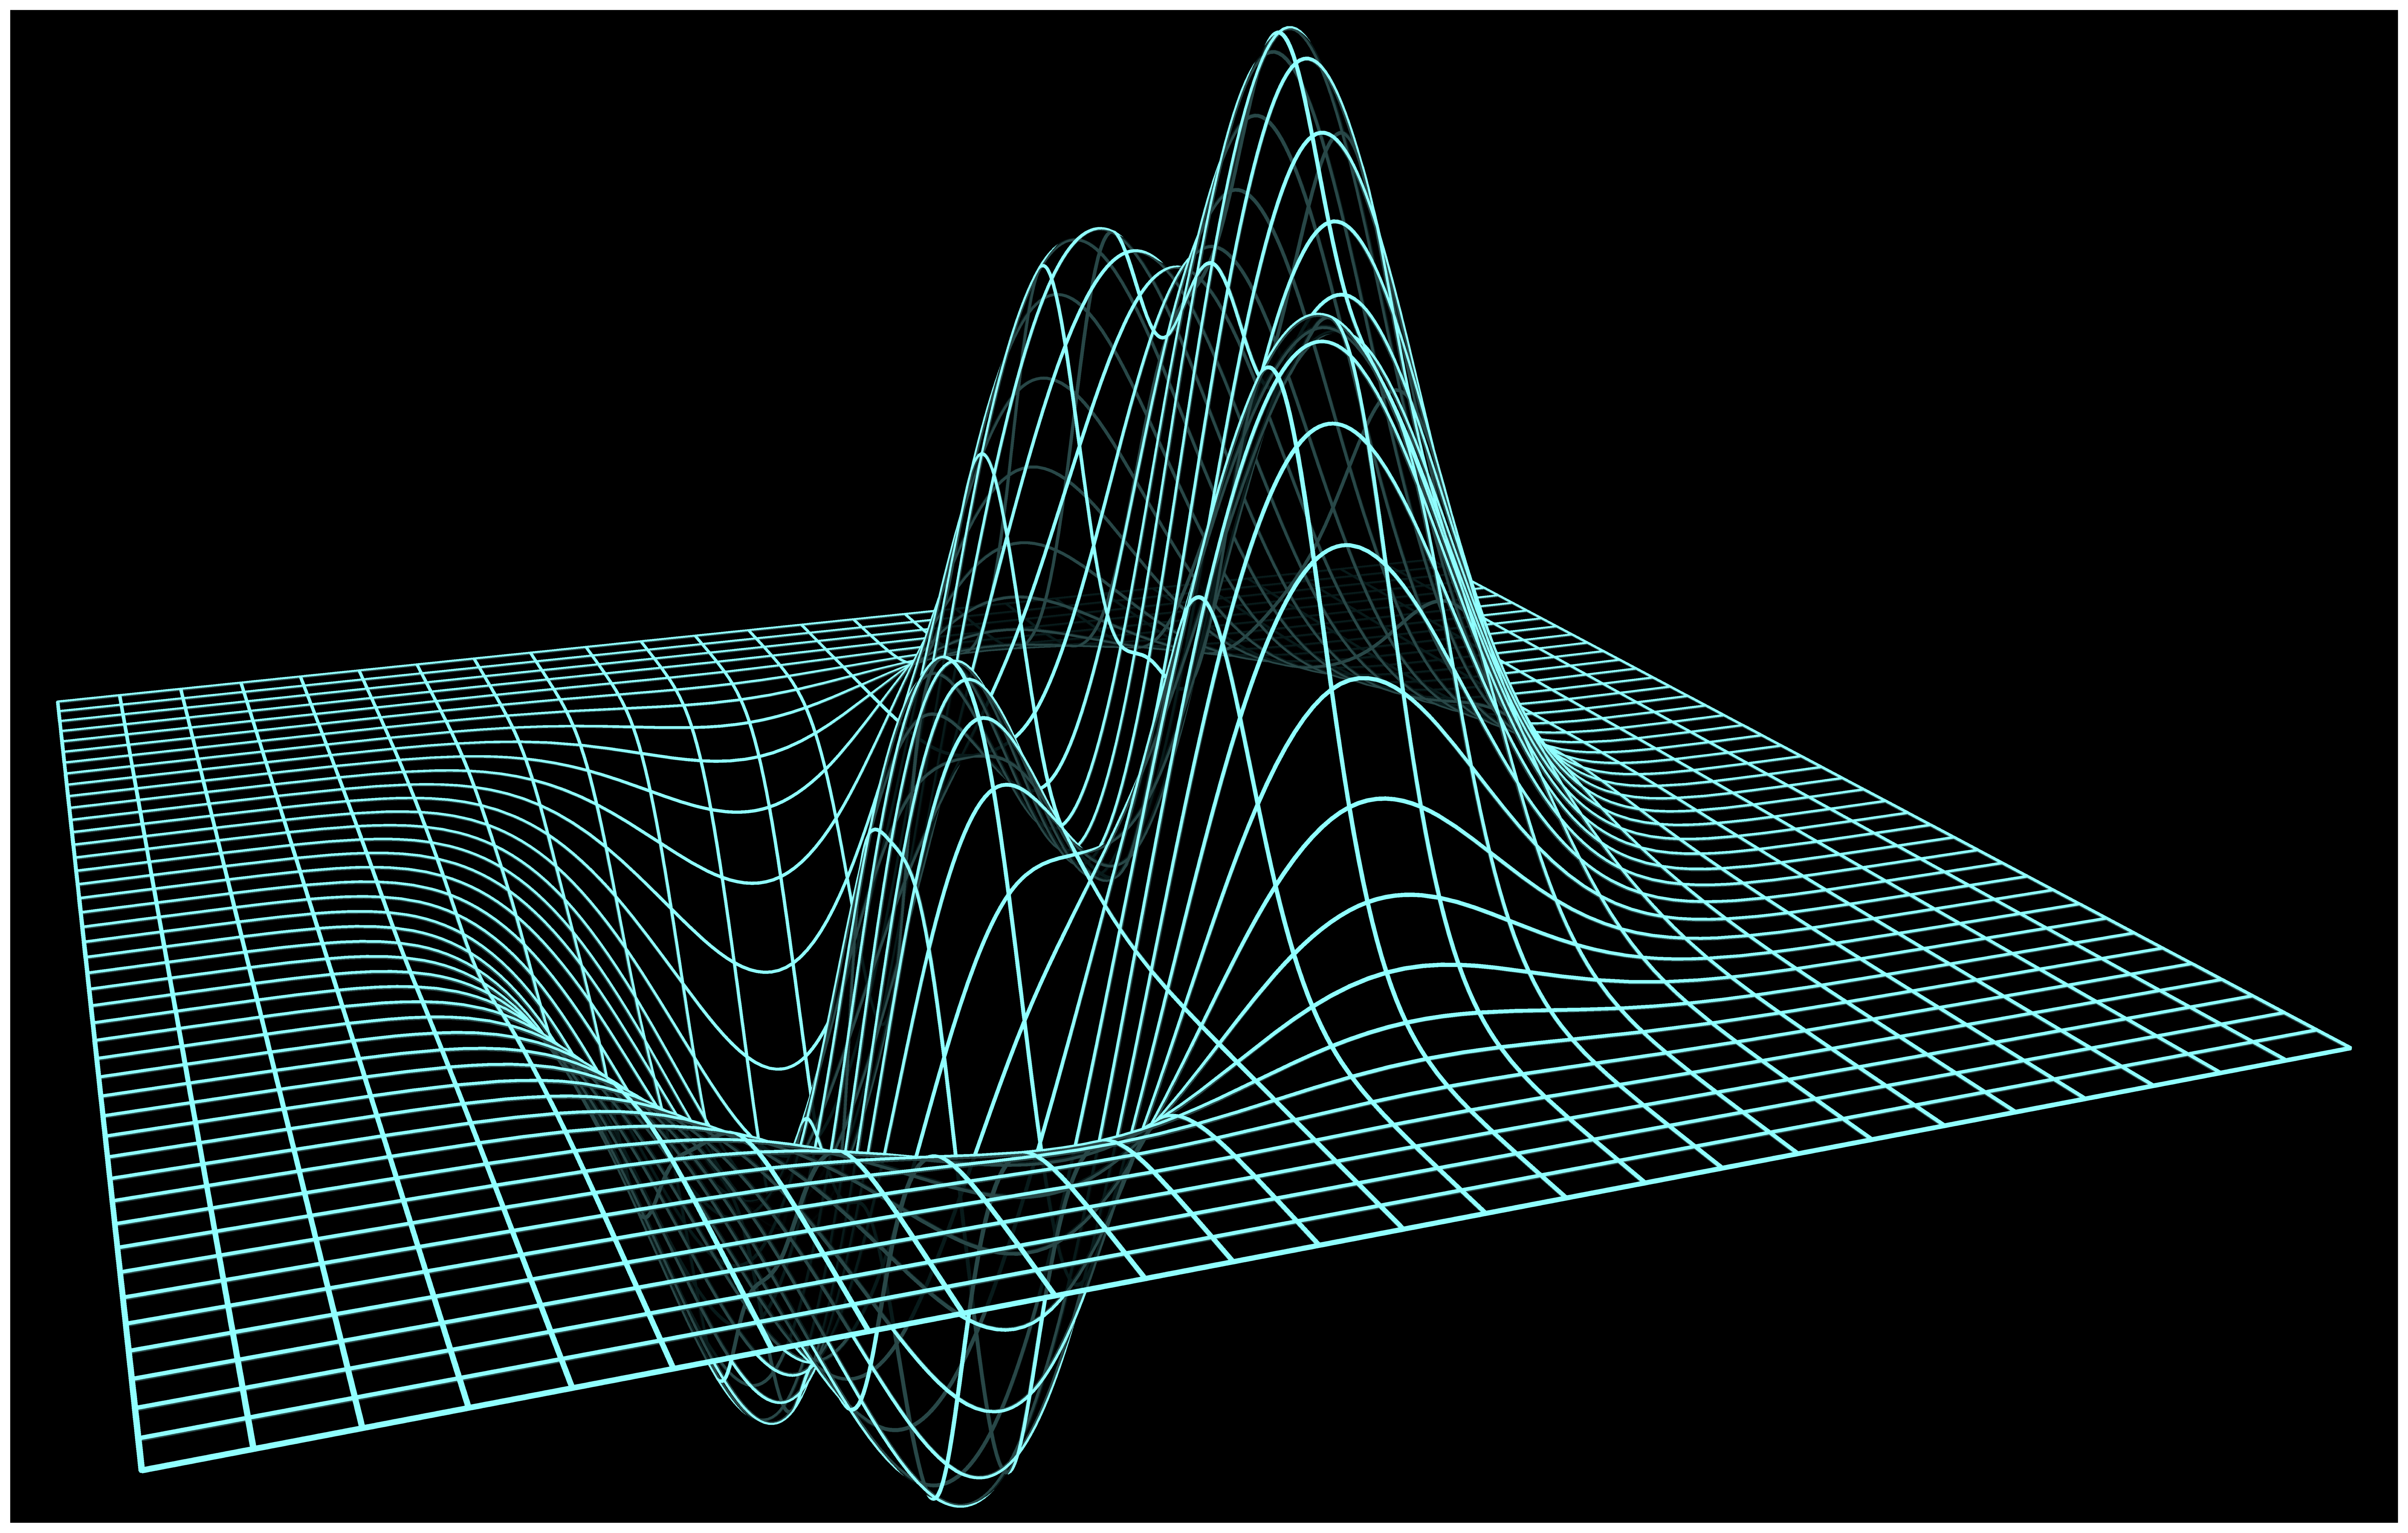 calculus surface realistic 3D graph function